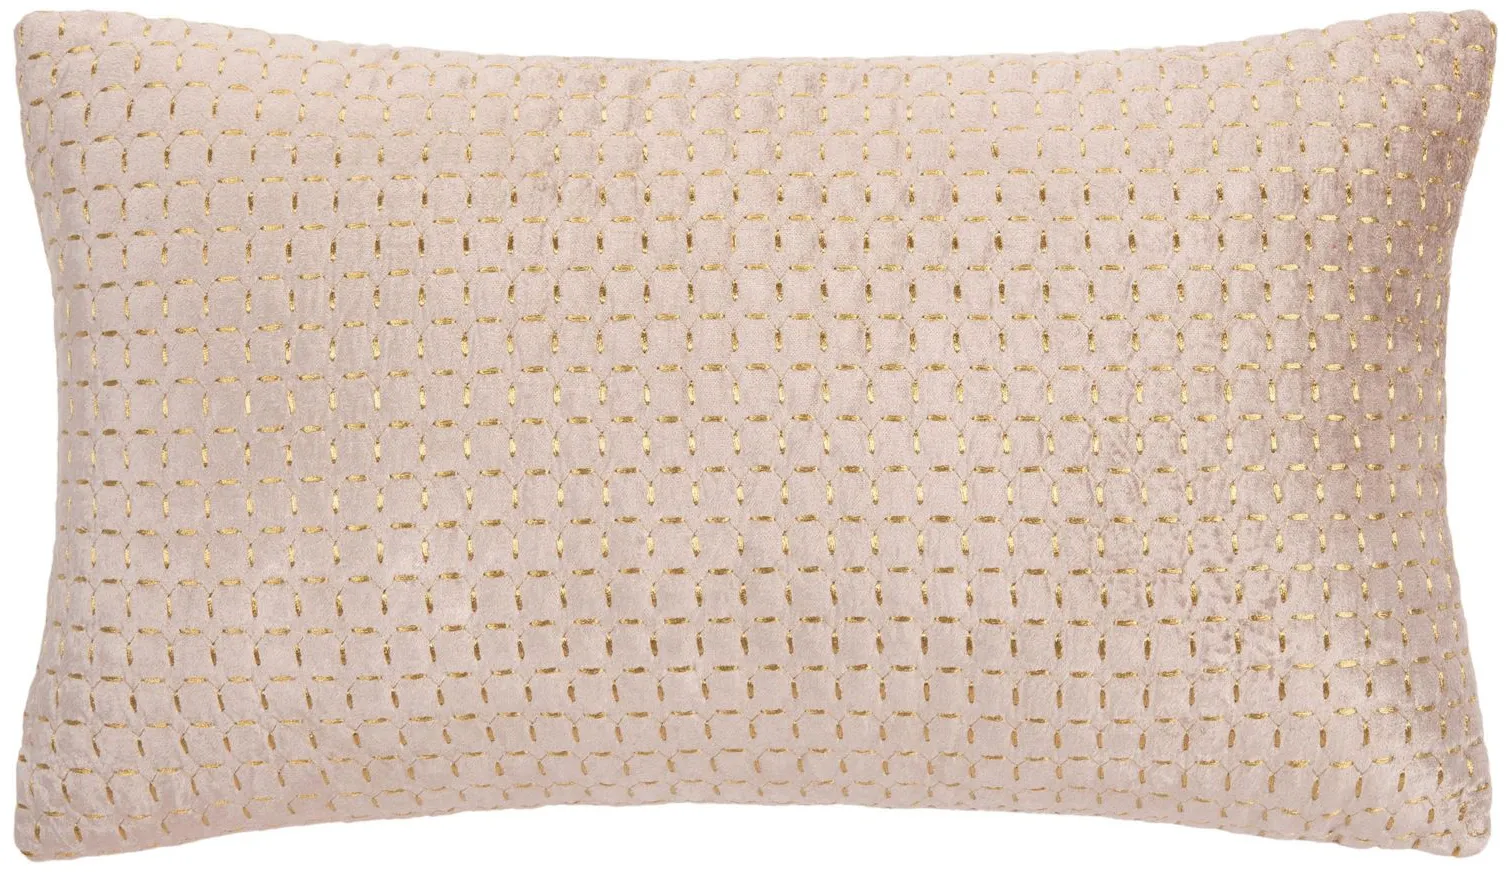 Embellished Lovie Accent Pillow in Blush by Safavieh